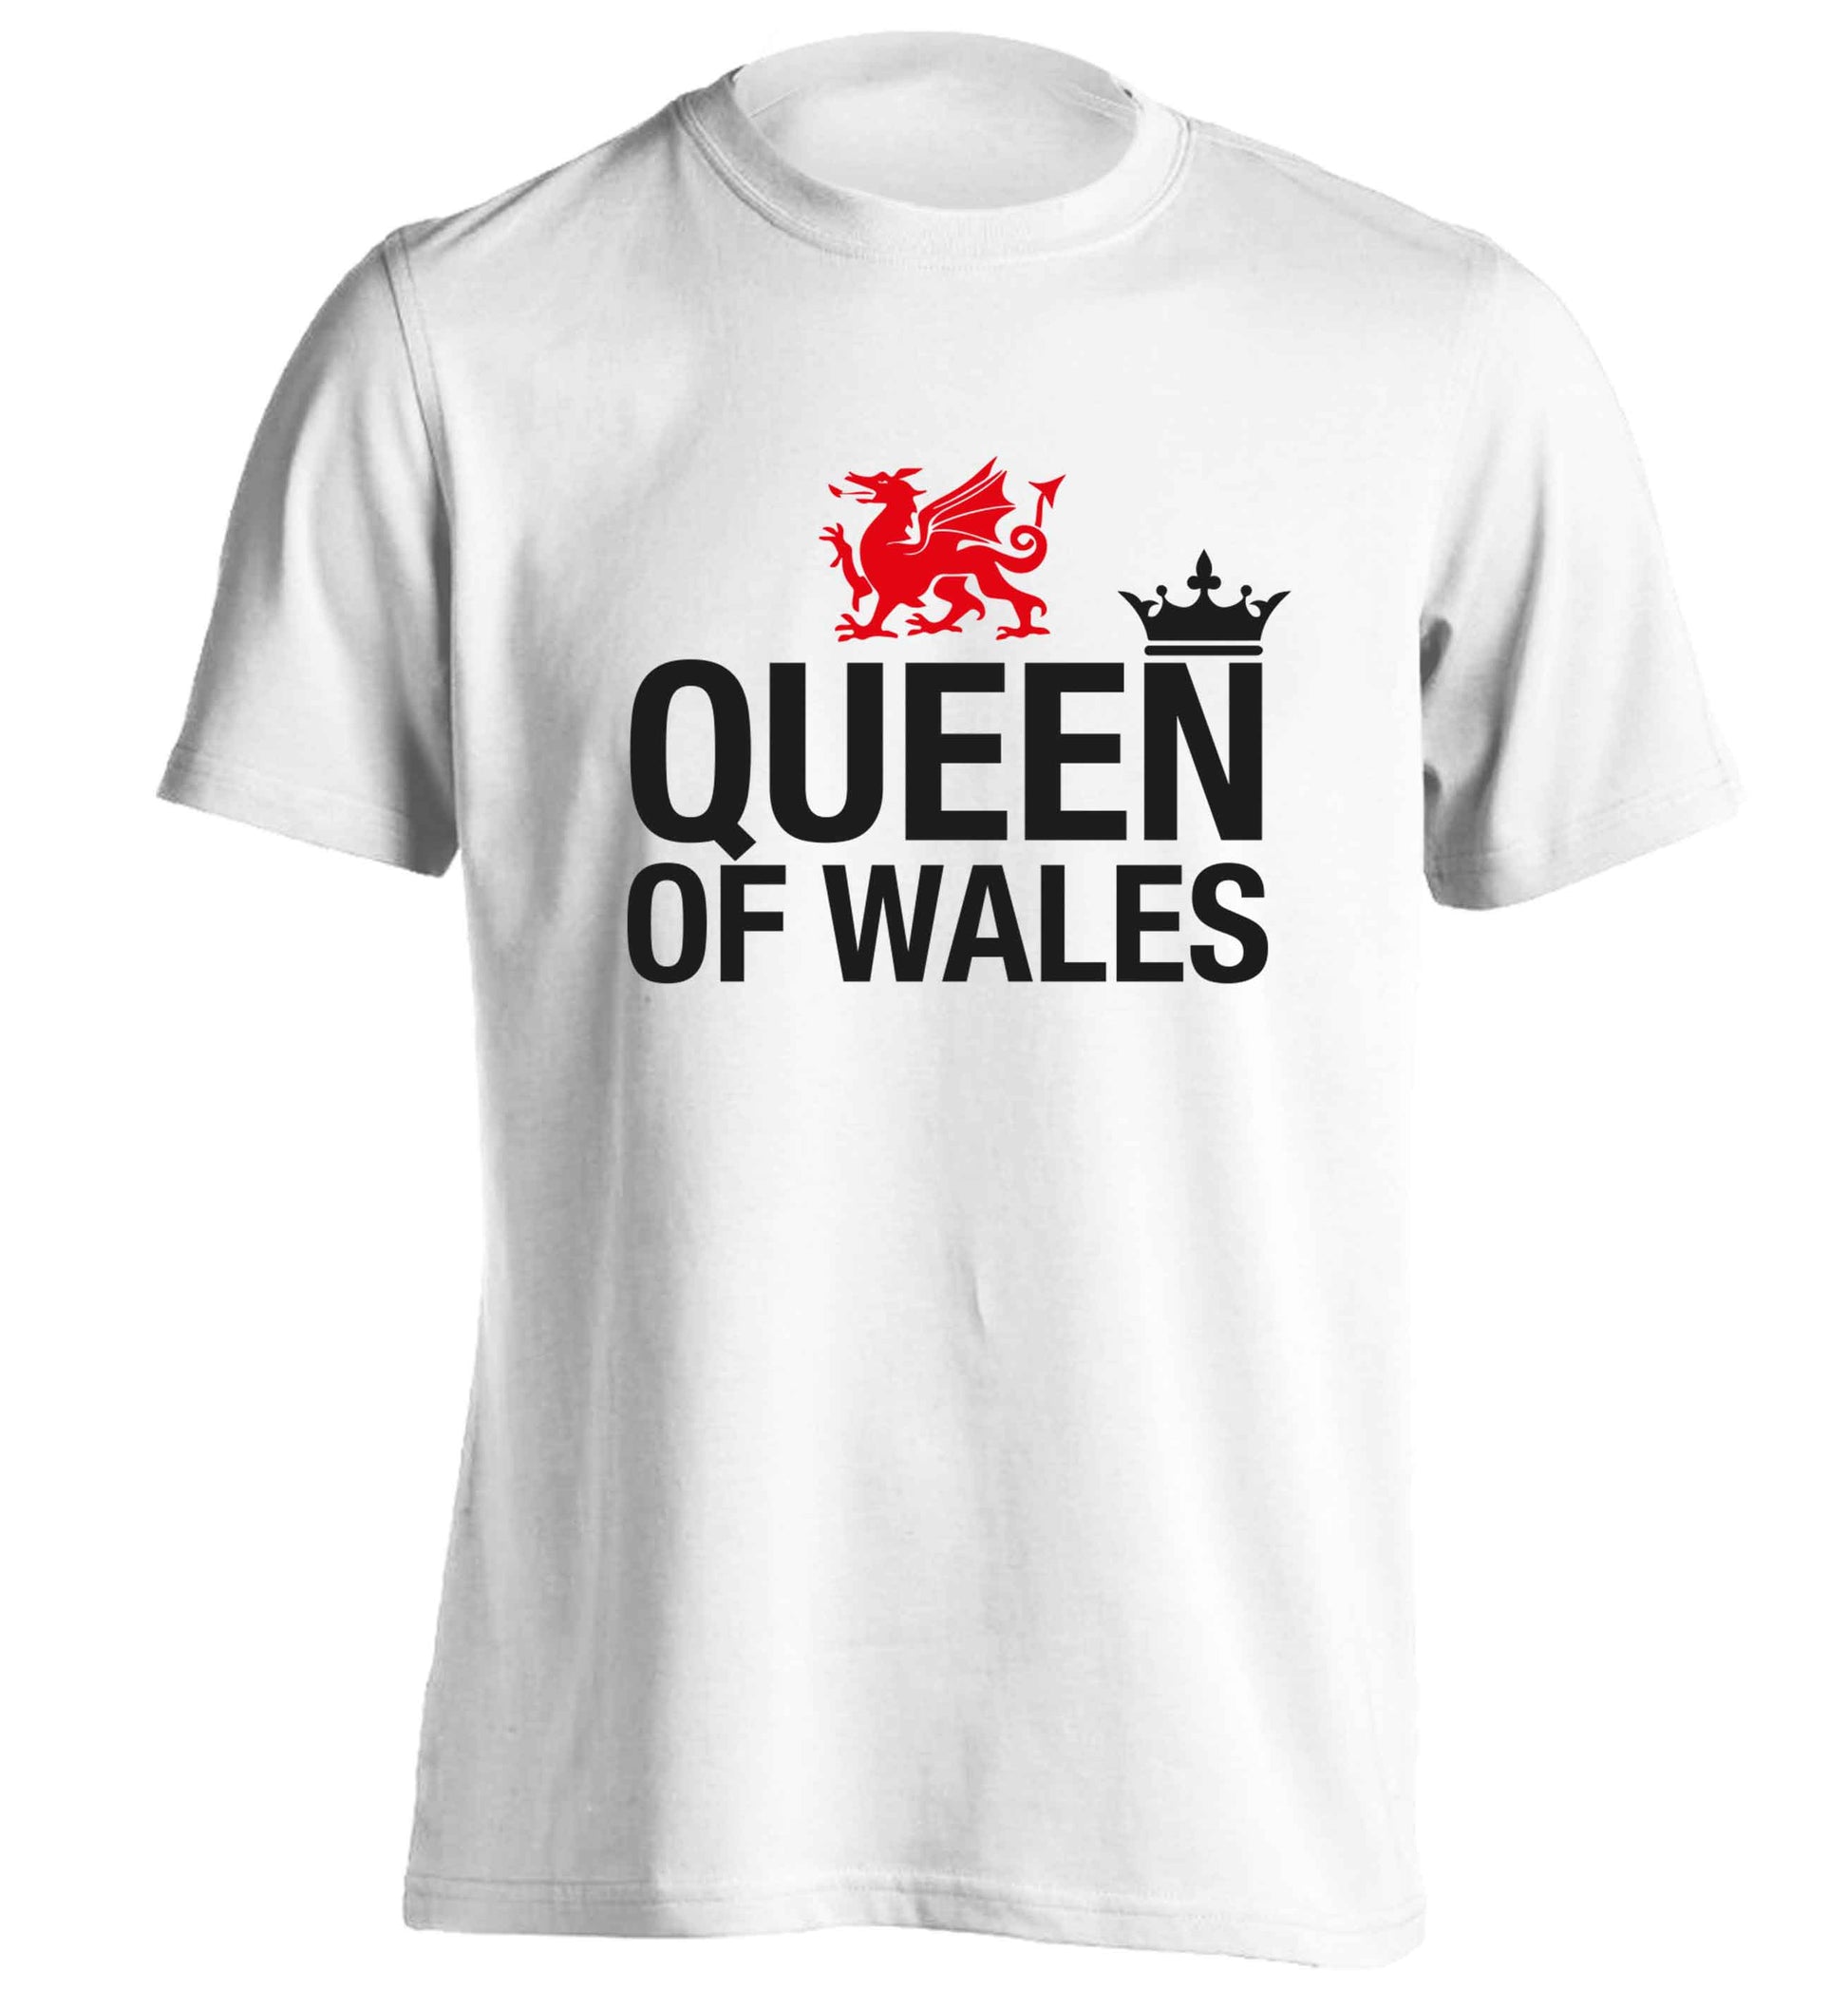 Queen of Wales adults unisex white Tshirt 2XL